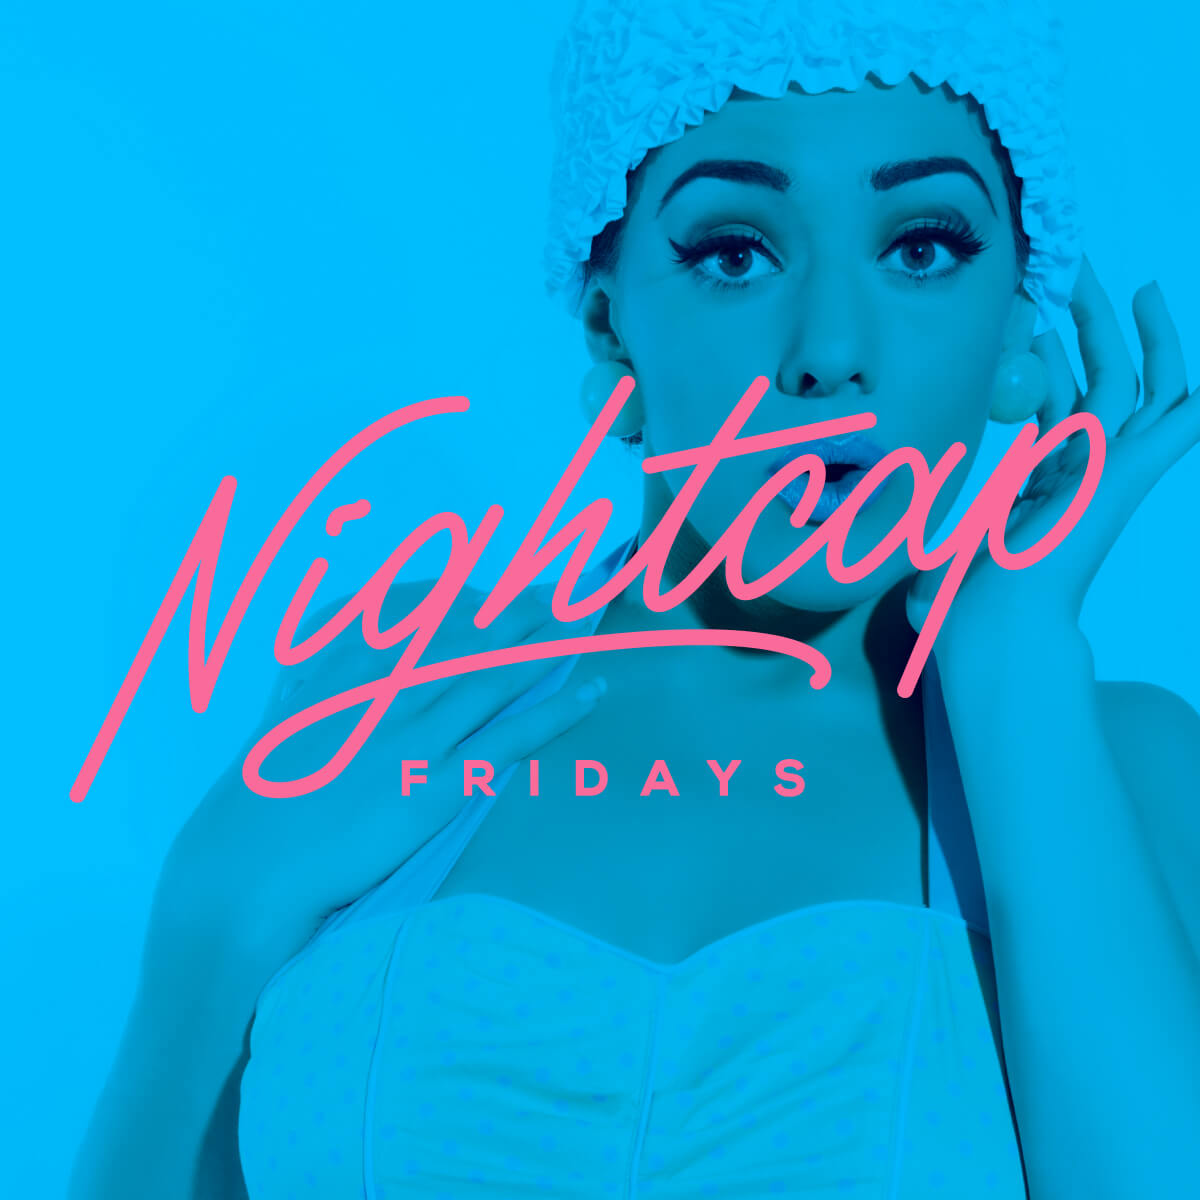 Kick Off the Weekend at Rooftop L.O.A.’s Nightcap Fridays, Fulton, Georgia, United States